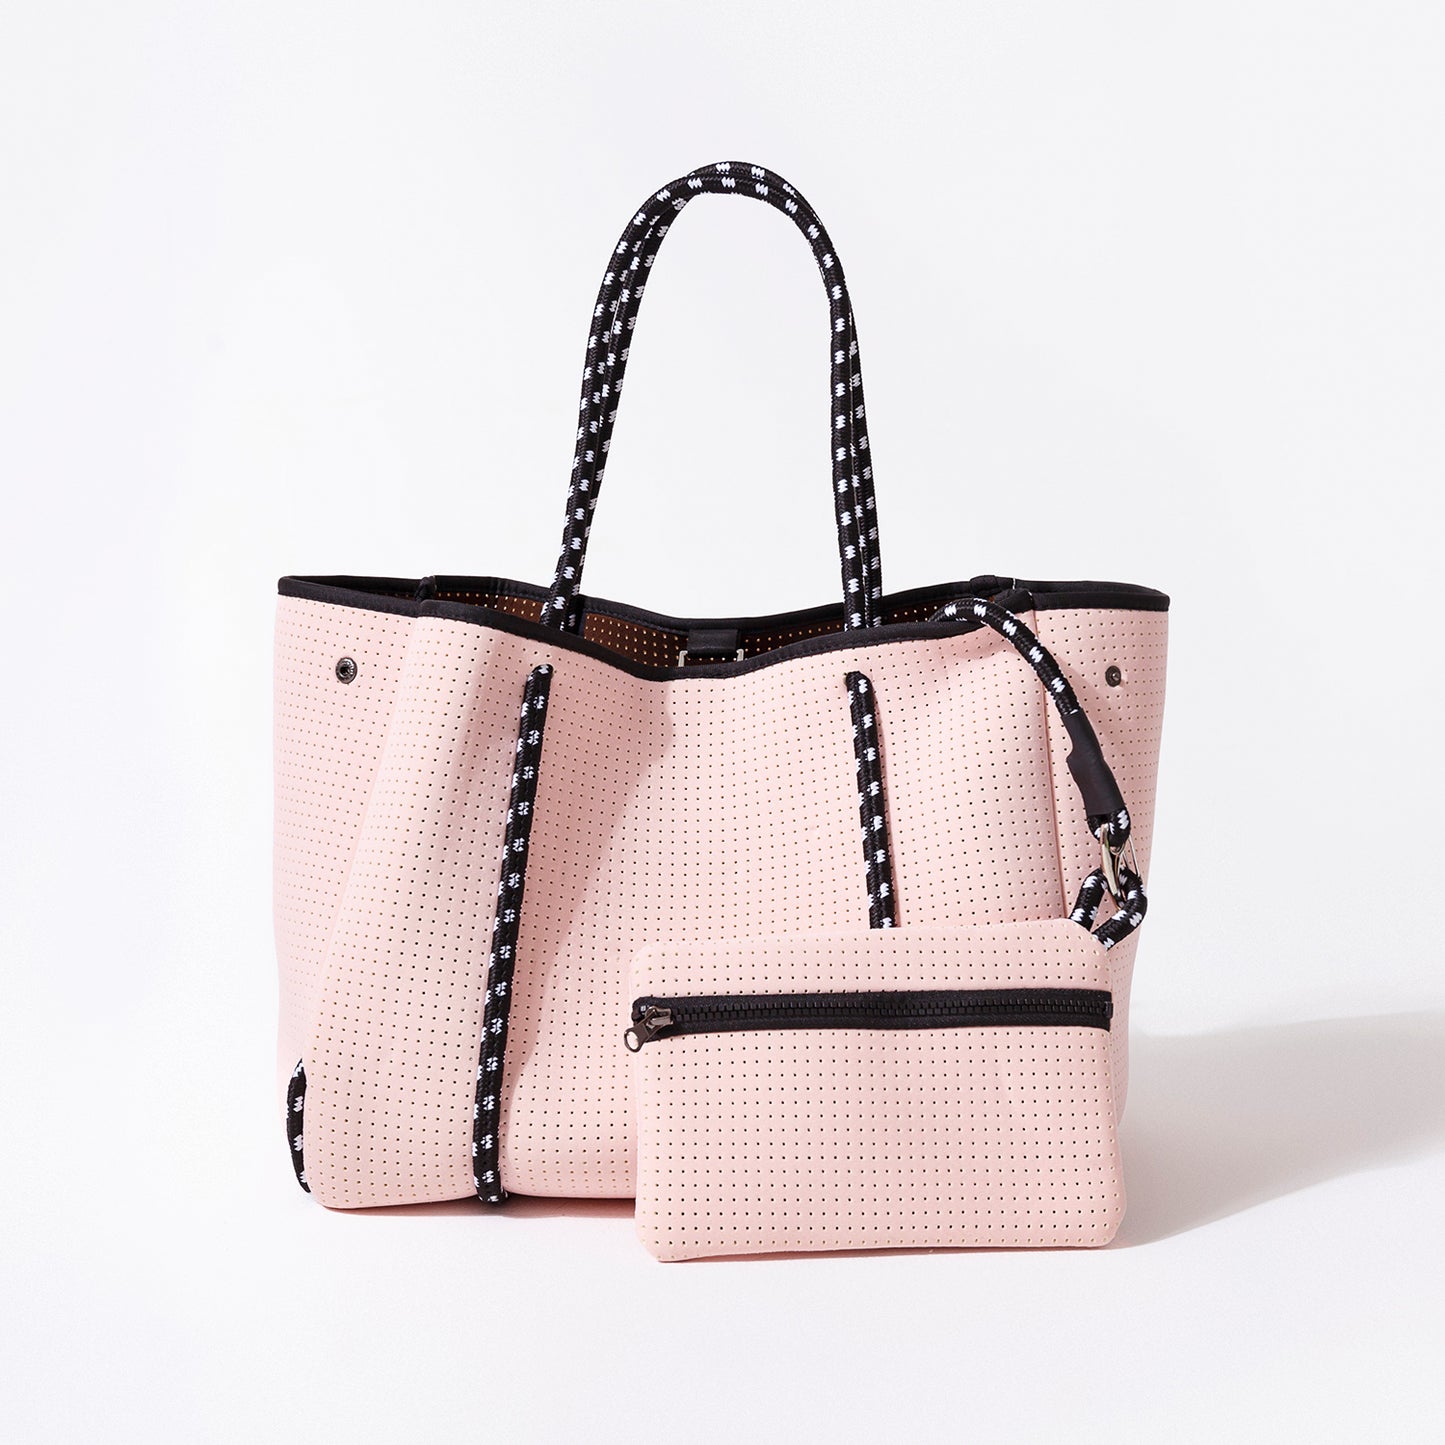 EVERYDAY TOTE PRETTY IN PINK II